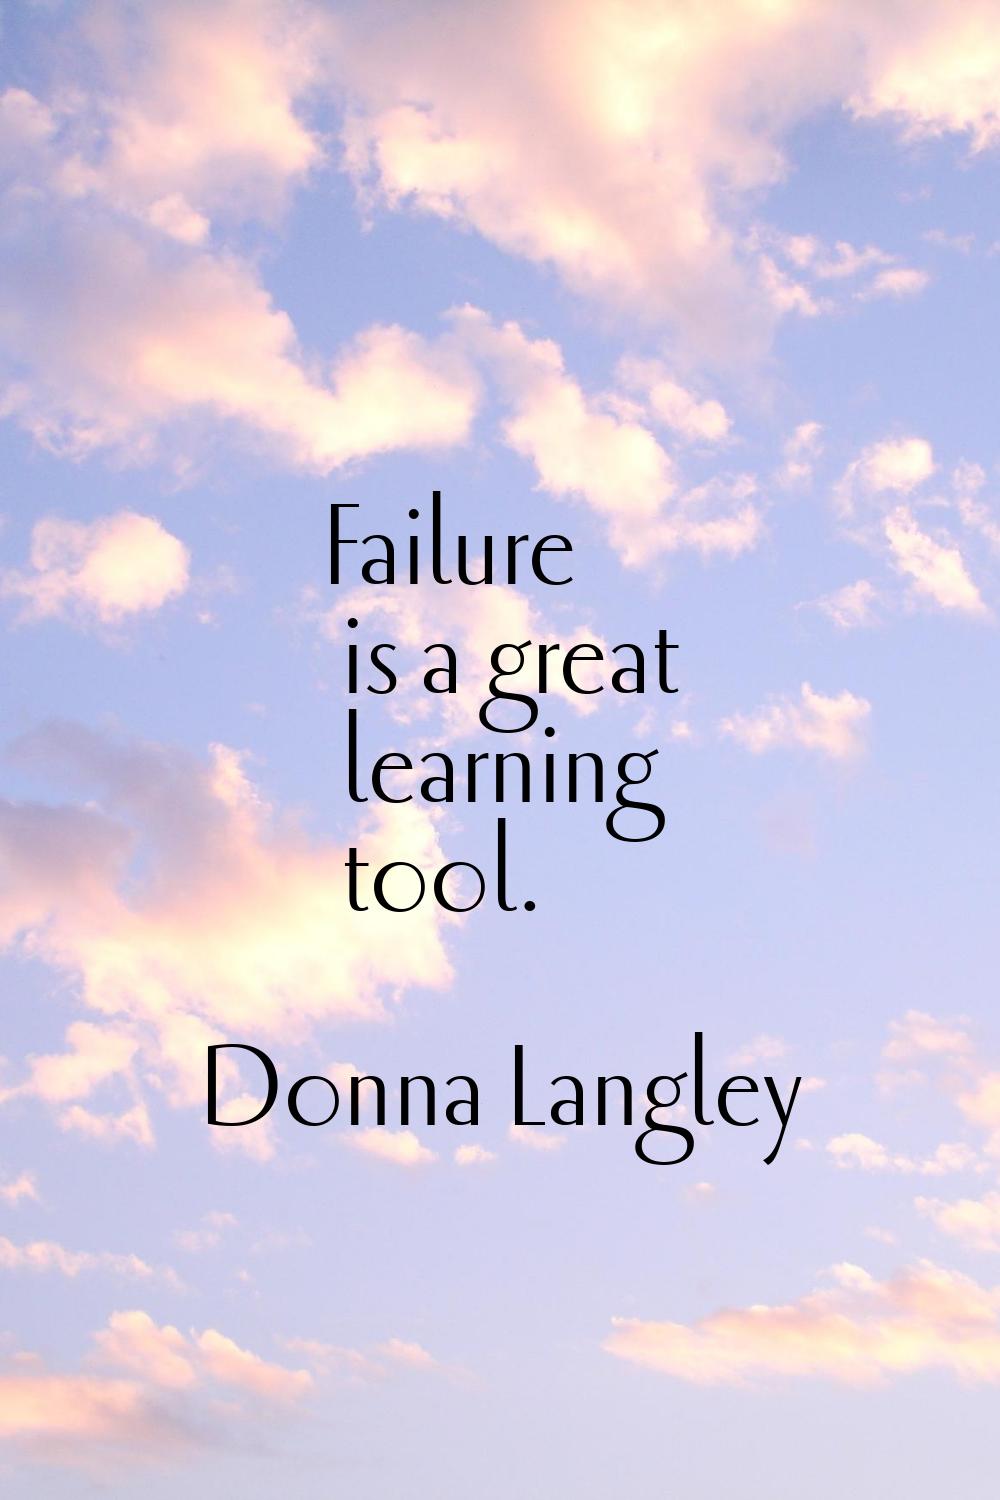 Failure is a great learning tool.